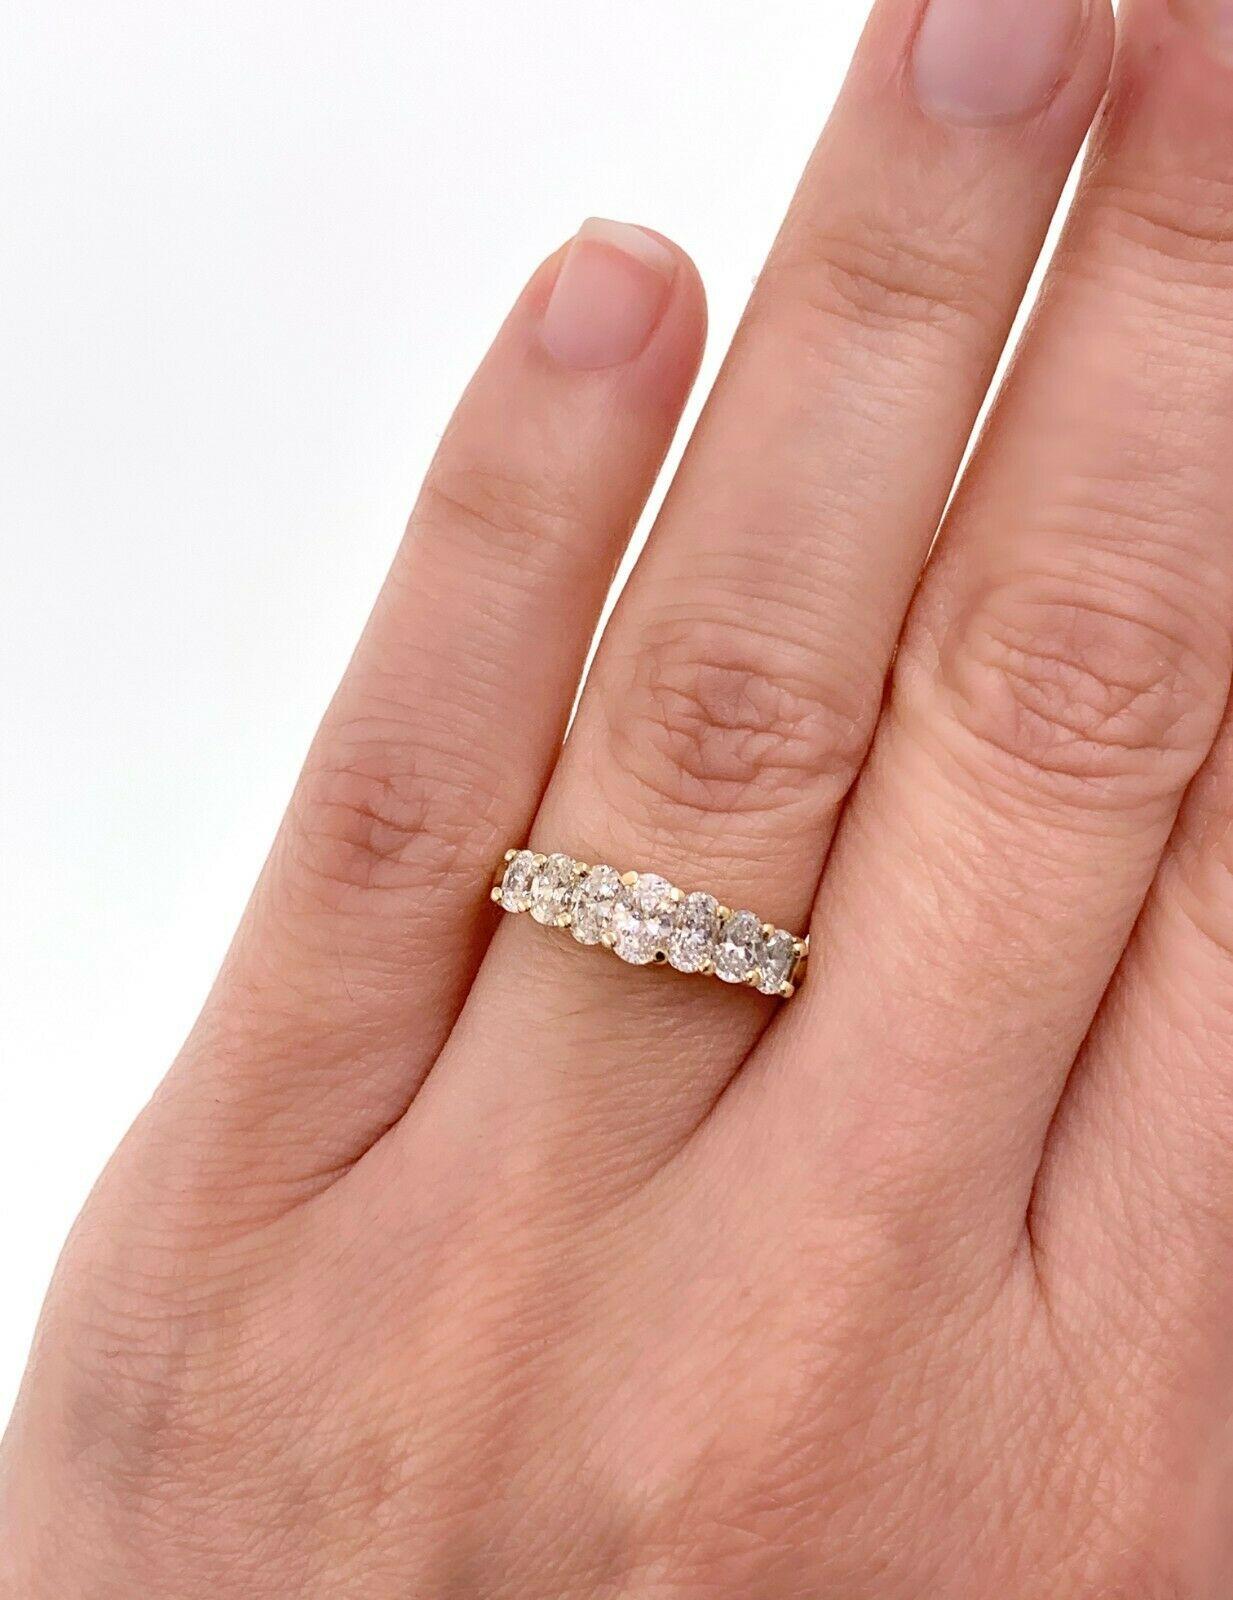 Oval Brilliant Diamond Ring
Style: 7-Diamond Graduated Diamond Band
Metal:  14K Yellow Gold
Size / Measurements:  5.5, sizable
TCW:  1.00 carats total approximate
Diamonds:  7 Oval Cut Diamonds
Color & Clarity:  H - I Color,  VS2 - SI1